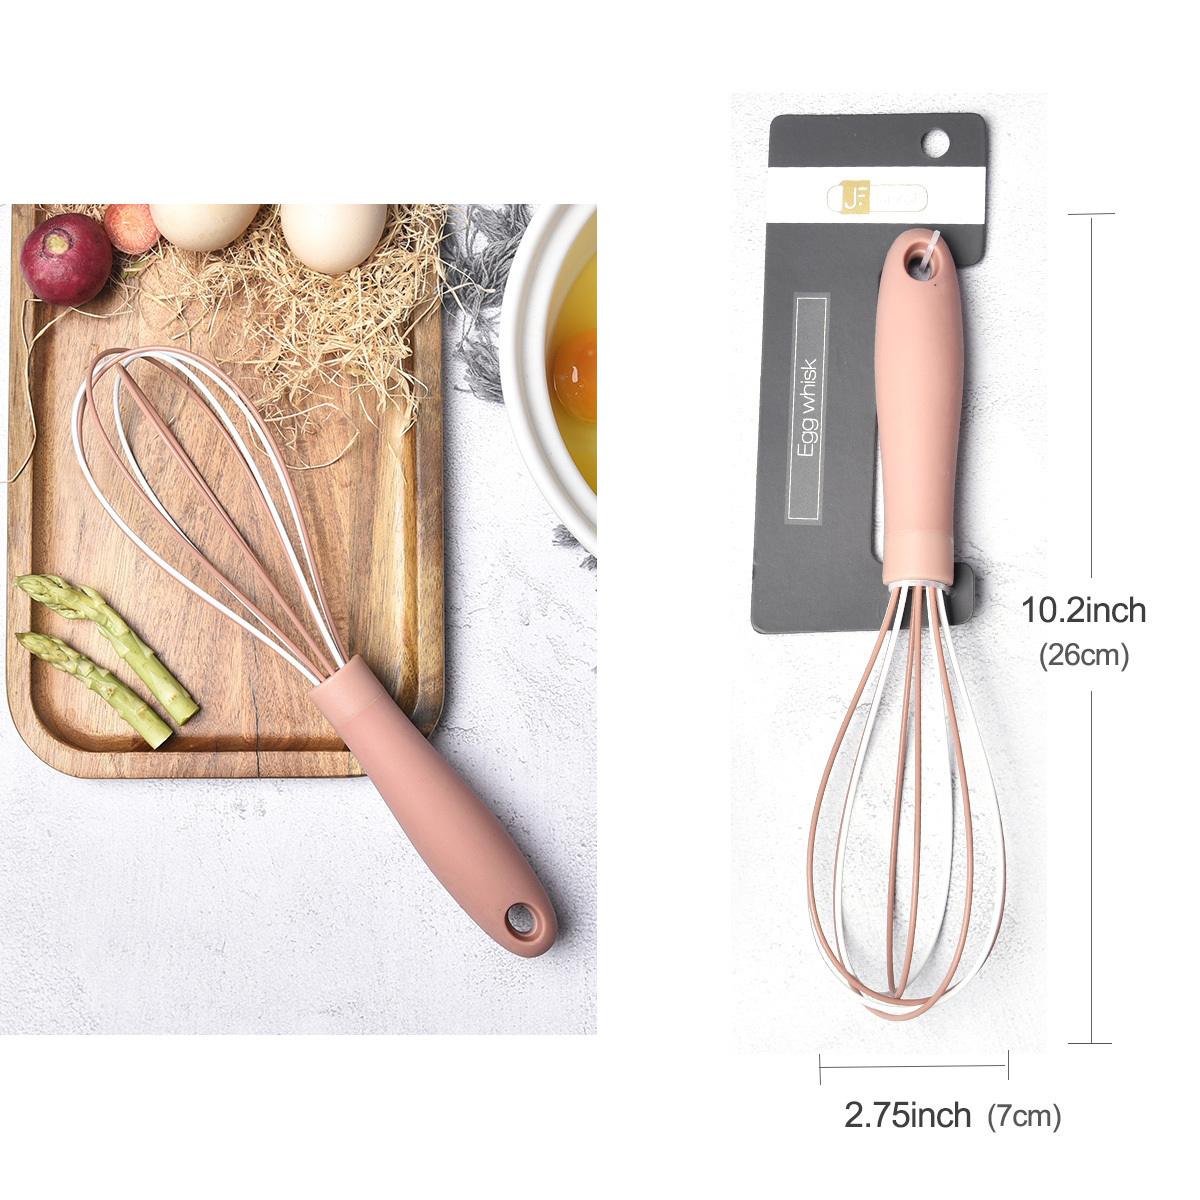 Silicone Whisk Set, 3 Pack Wire Whisk Kitchen Wisks for Cooking for  Blending, Whisking, Beating, Stirring 